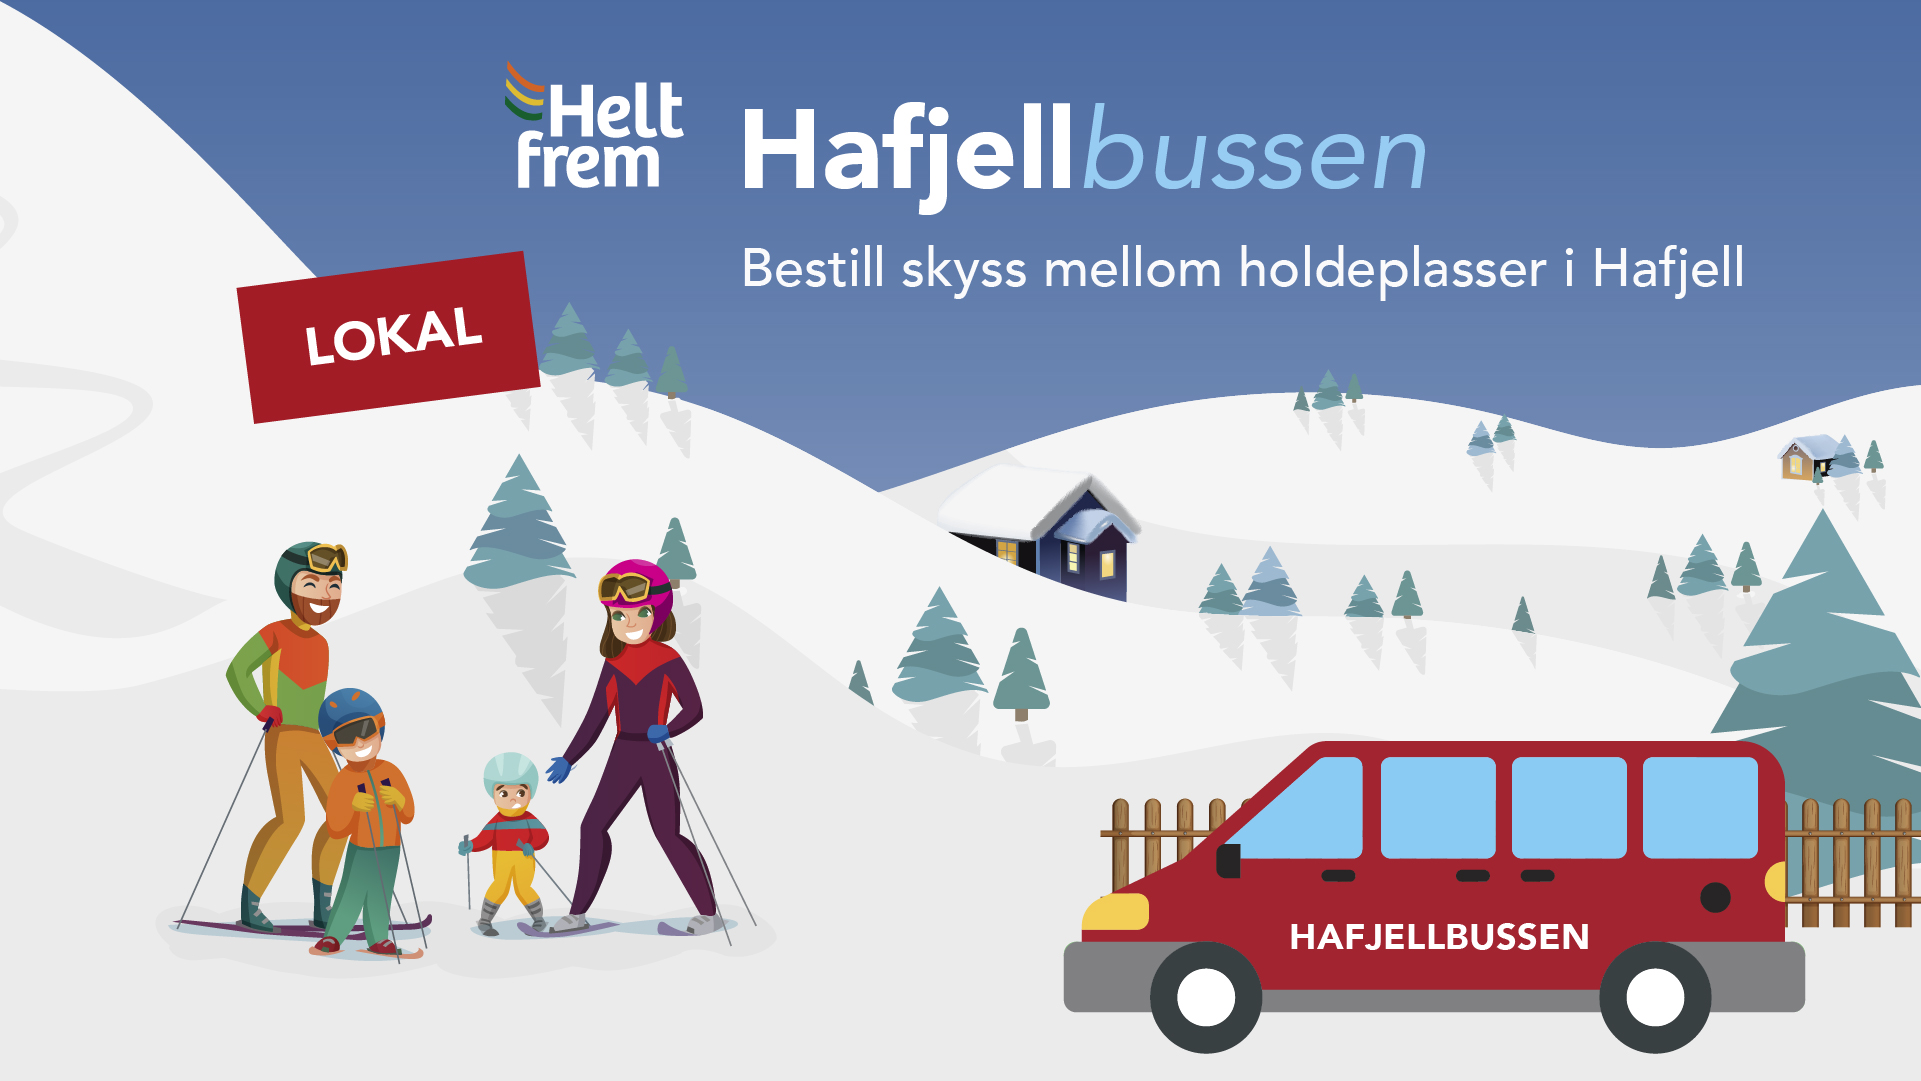 The Hafjell bus image